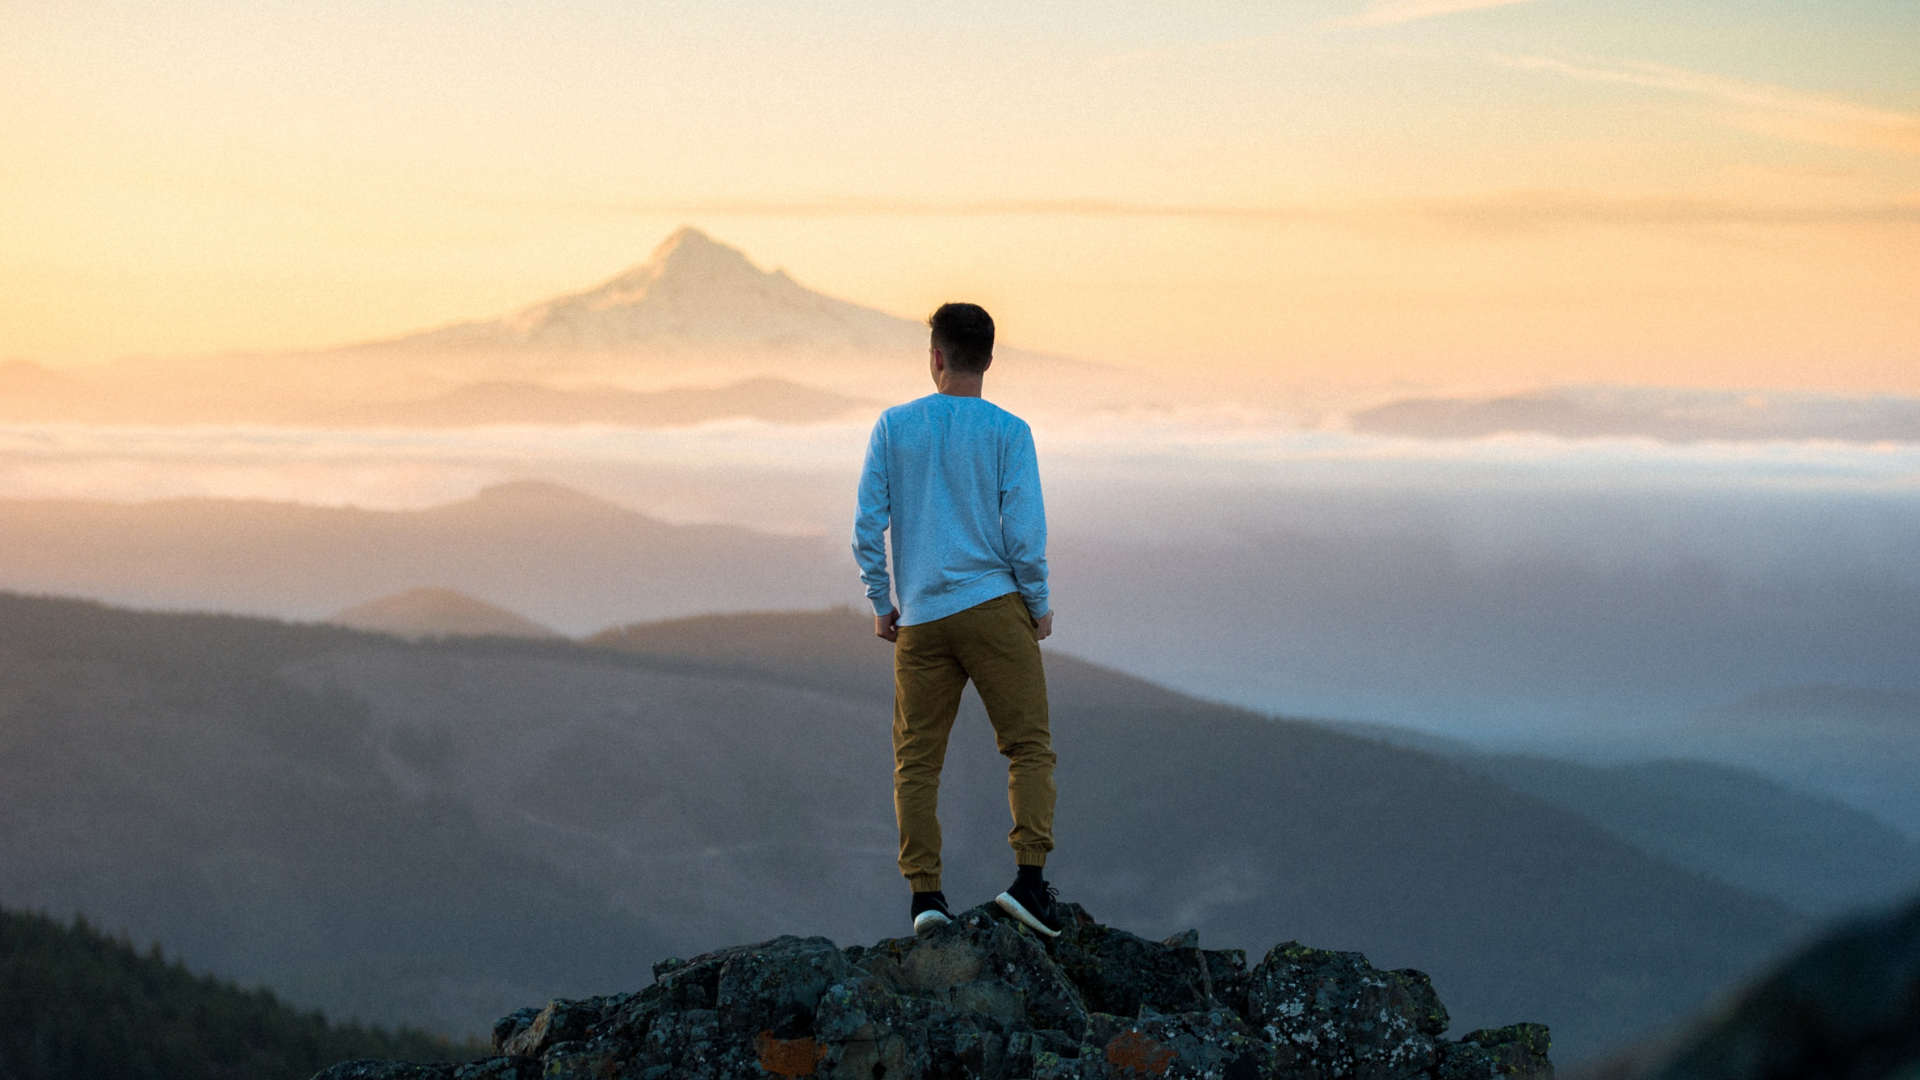 a man on a mountain peak gazes at a beautiful view of mountains during sunset hour